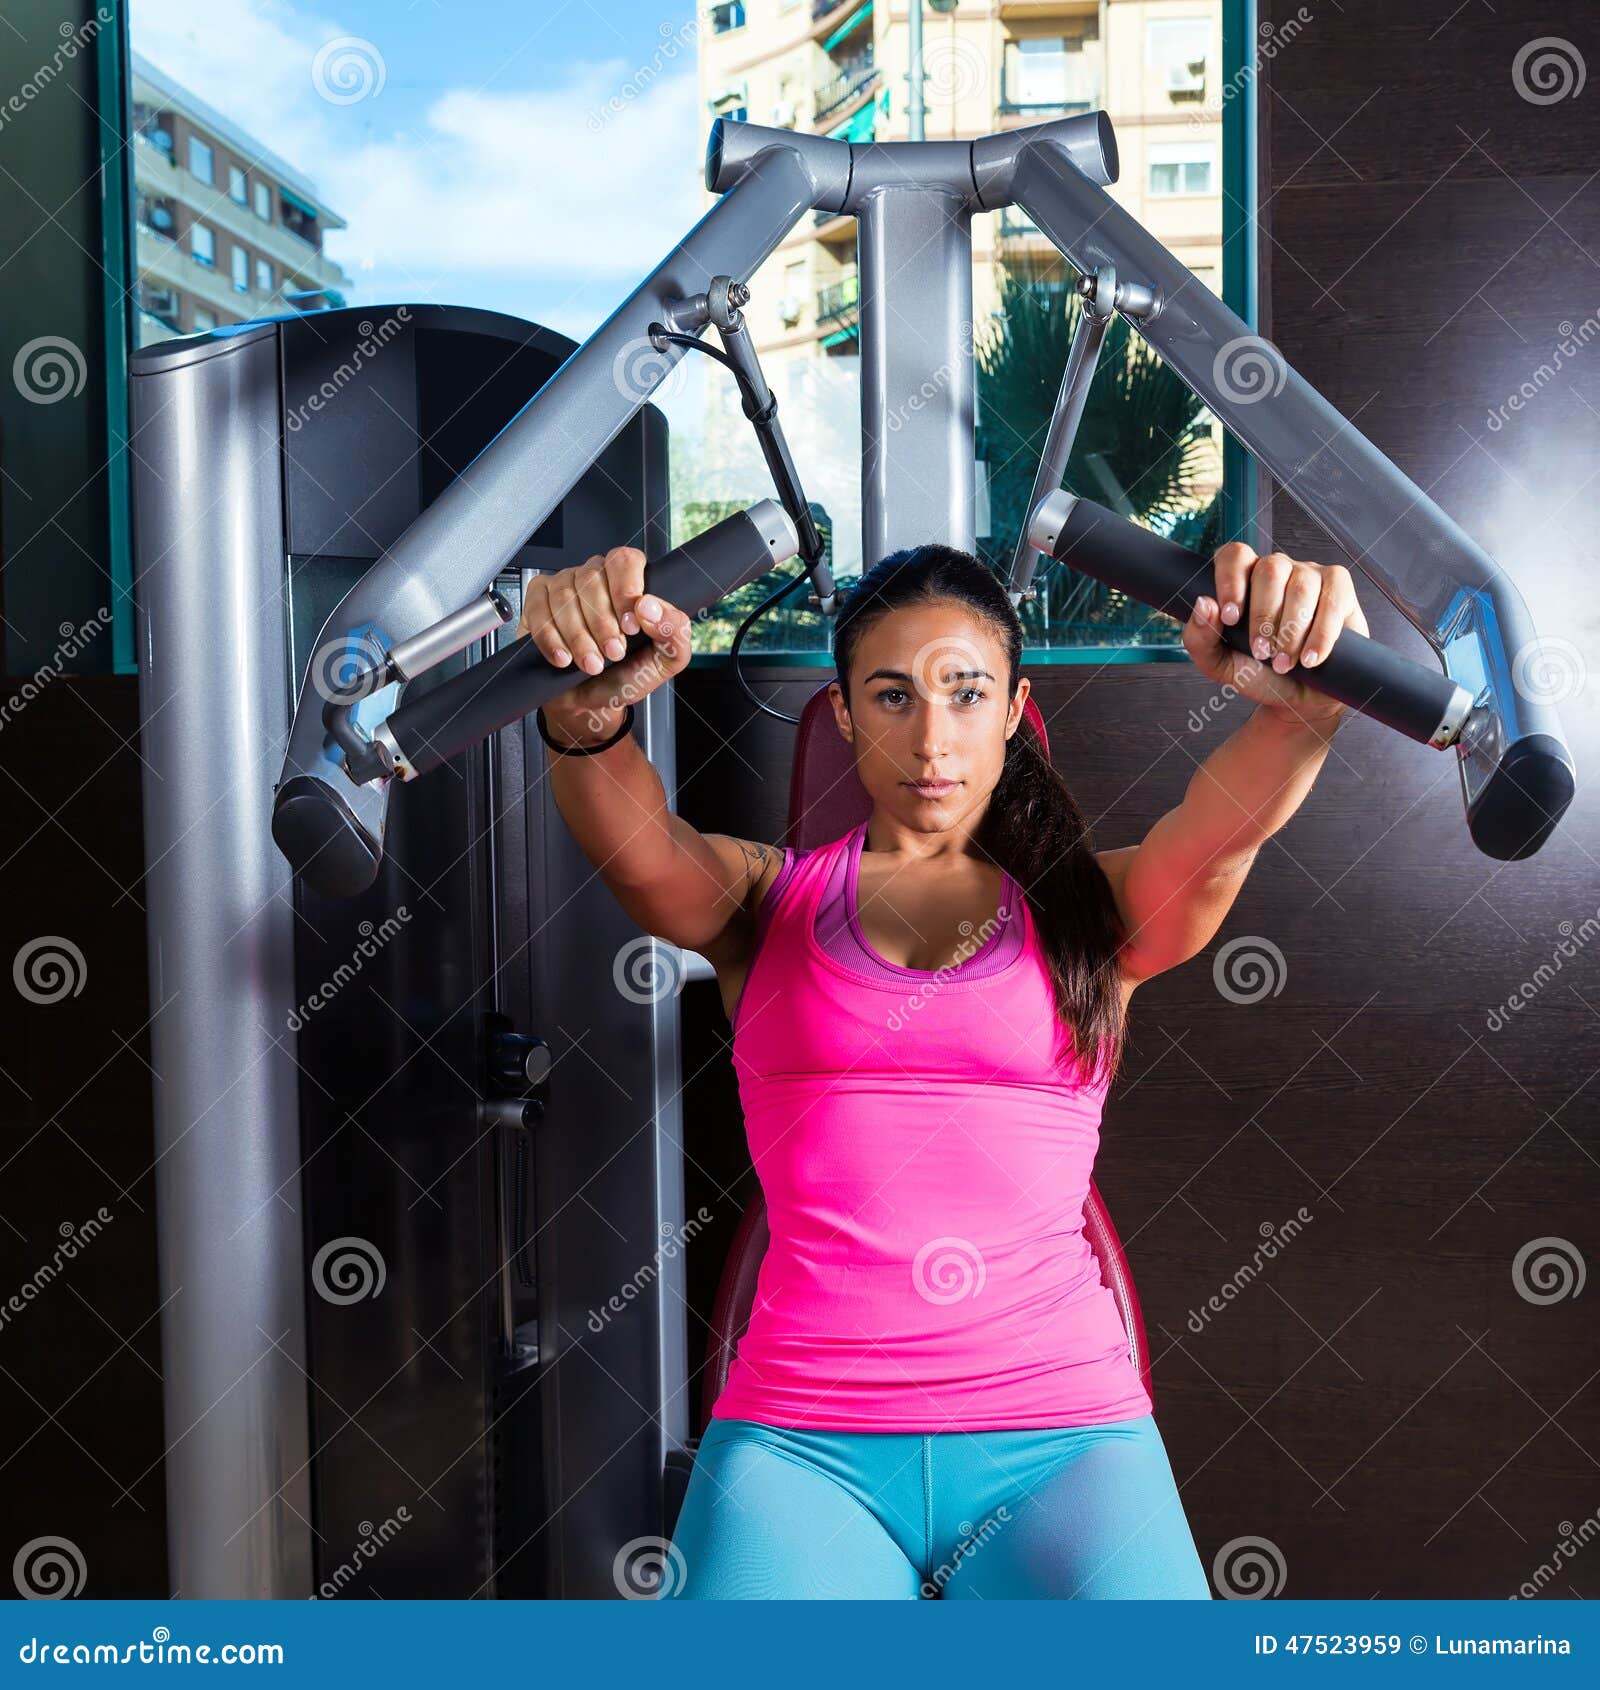 Brunette Woman Seated Chest Press Machine Gym Stock Image - Image